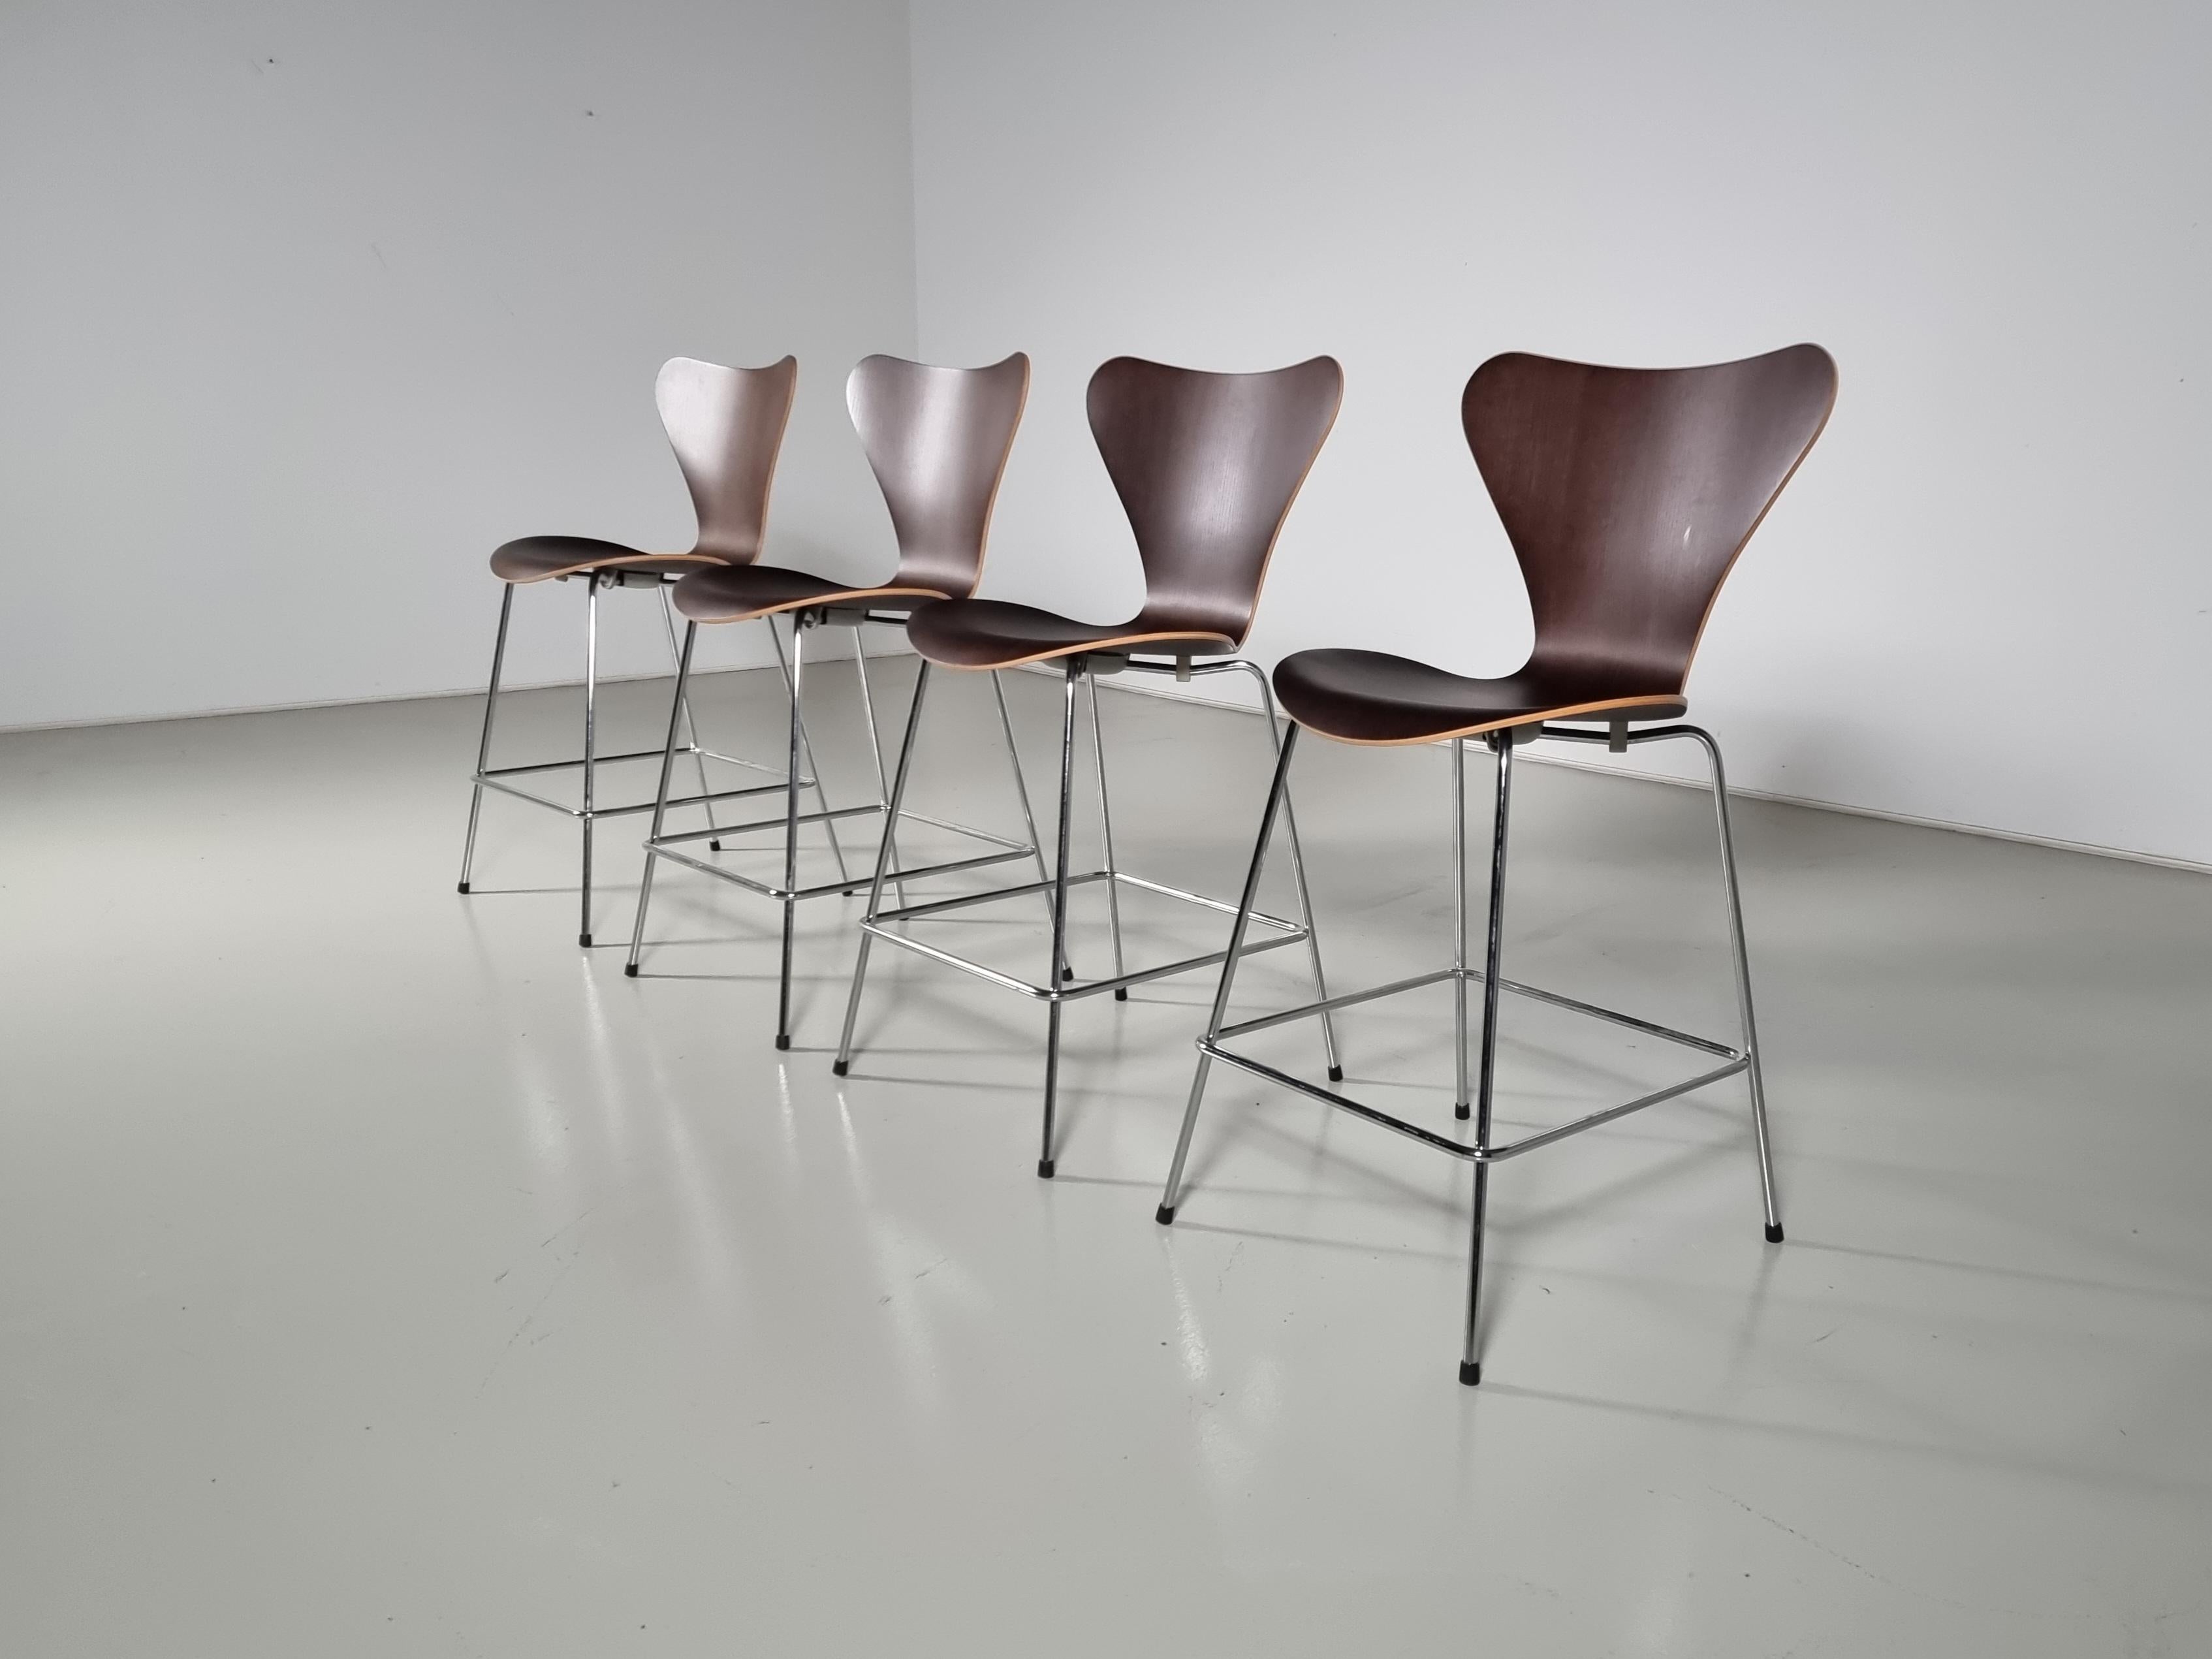 The Fritz Hansen Series 7 Bar Stool by Arne Jacobsen, designed in 1955

The seat is made of curved dark stained oak plywood, a technique he previously used in the Ant Chair. The series 7 Butterfly is seen as the crowning achievement of Arne